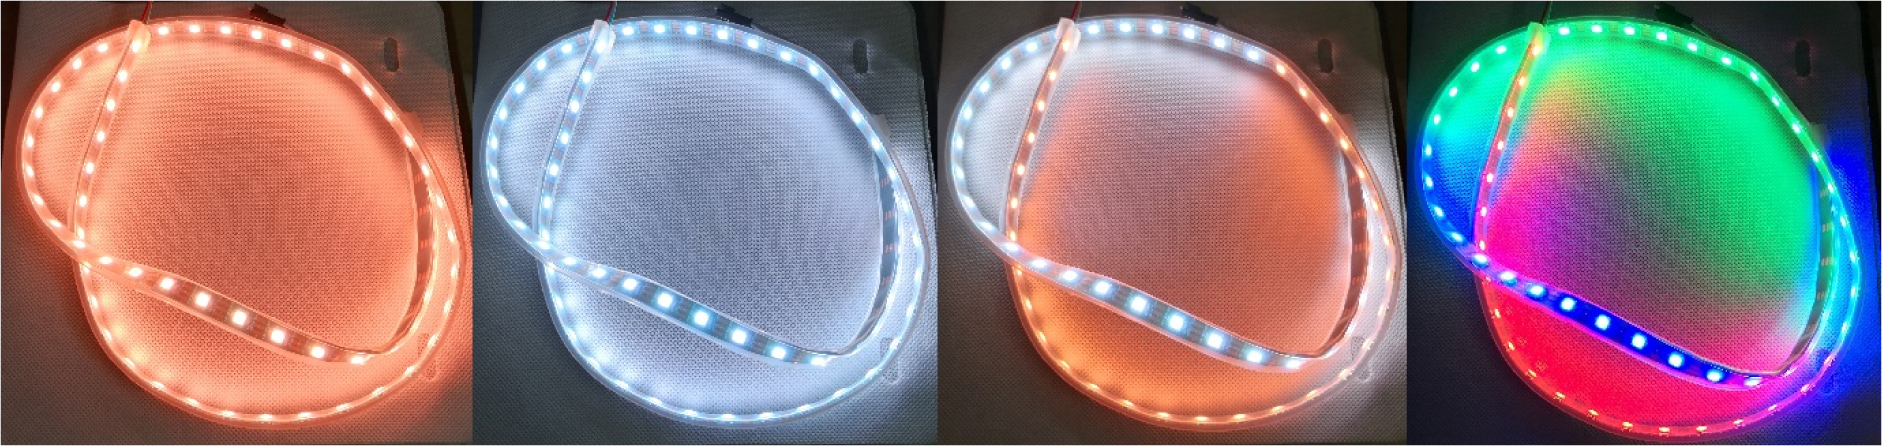 LED lighting strip producing variable tones of colours.